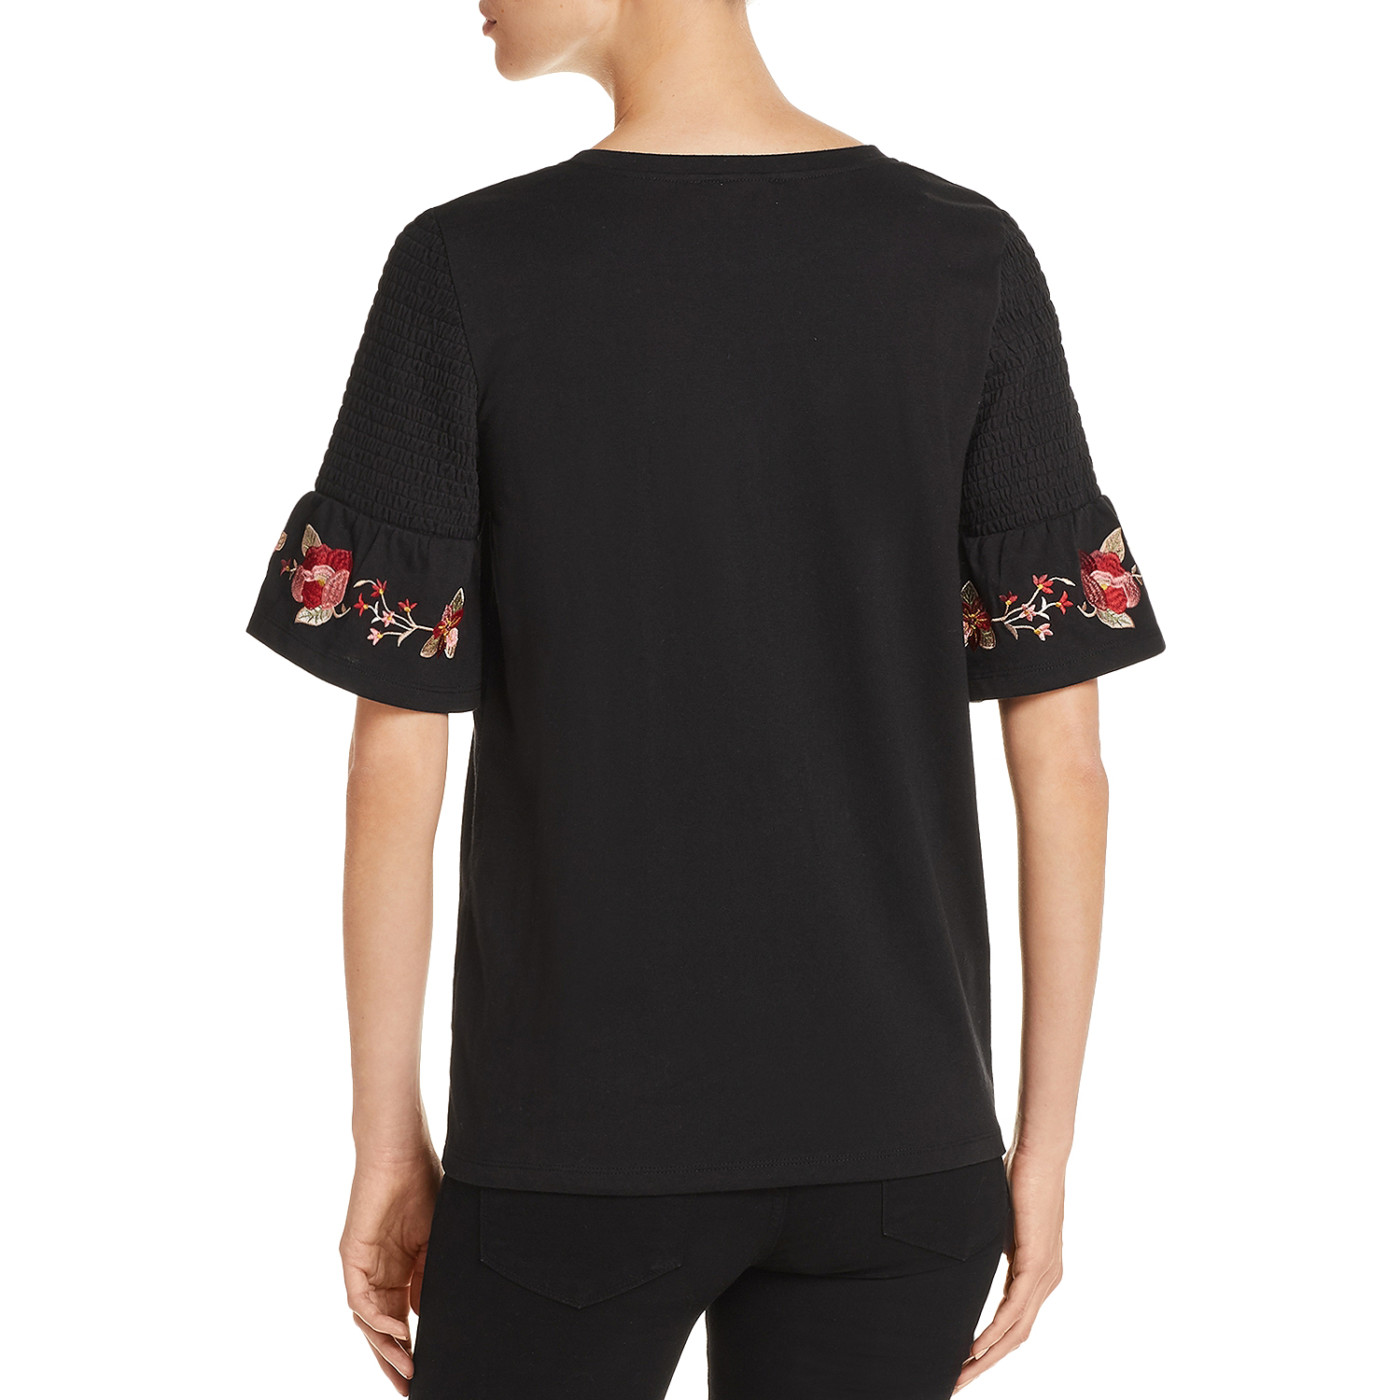 woocommerce-673321-2209615.cloudwaysapps.com-alison-andrews-womens-black-embroidered-smocked-sleeve-top